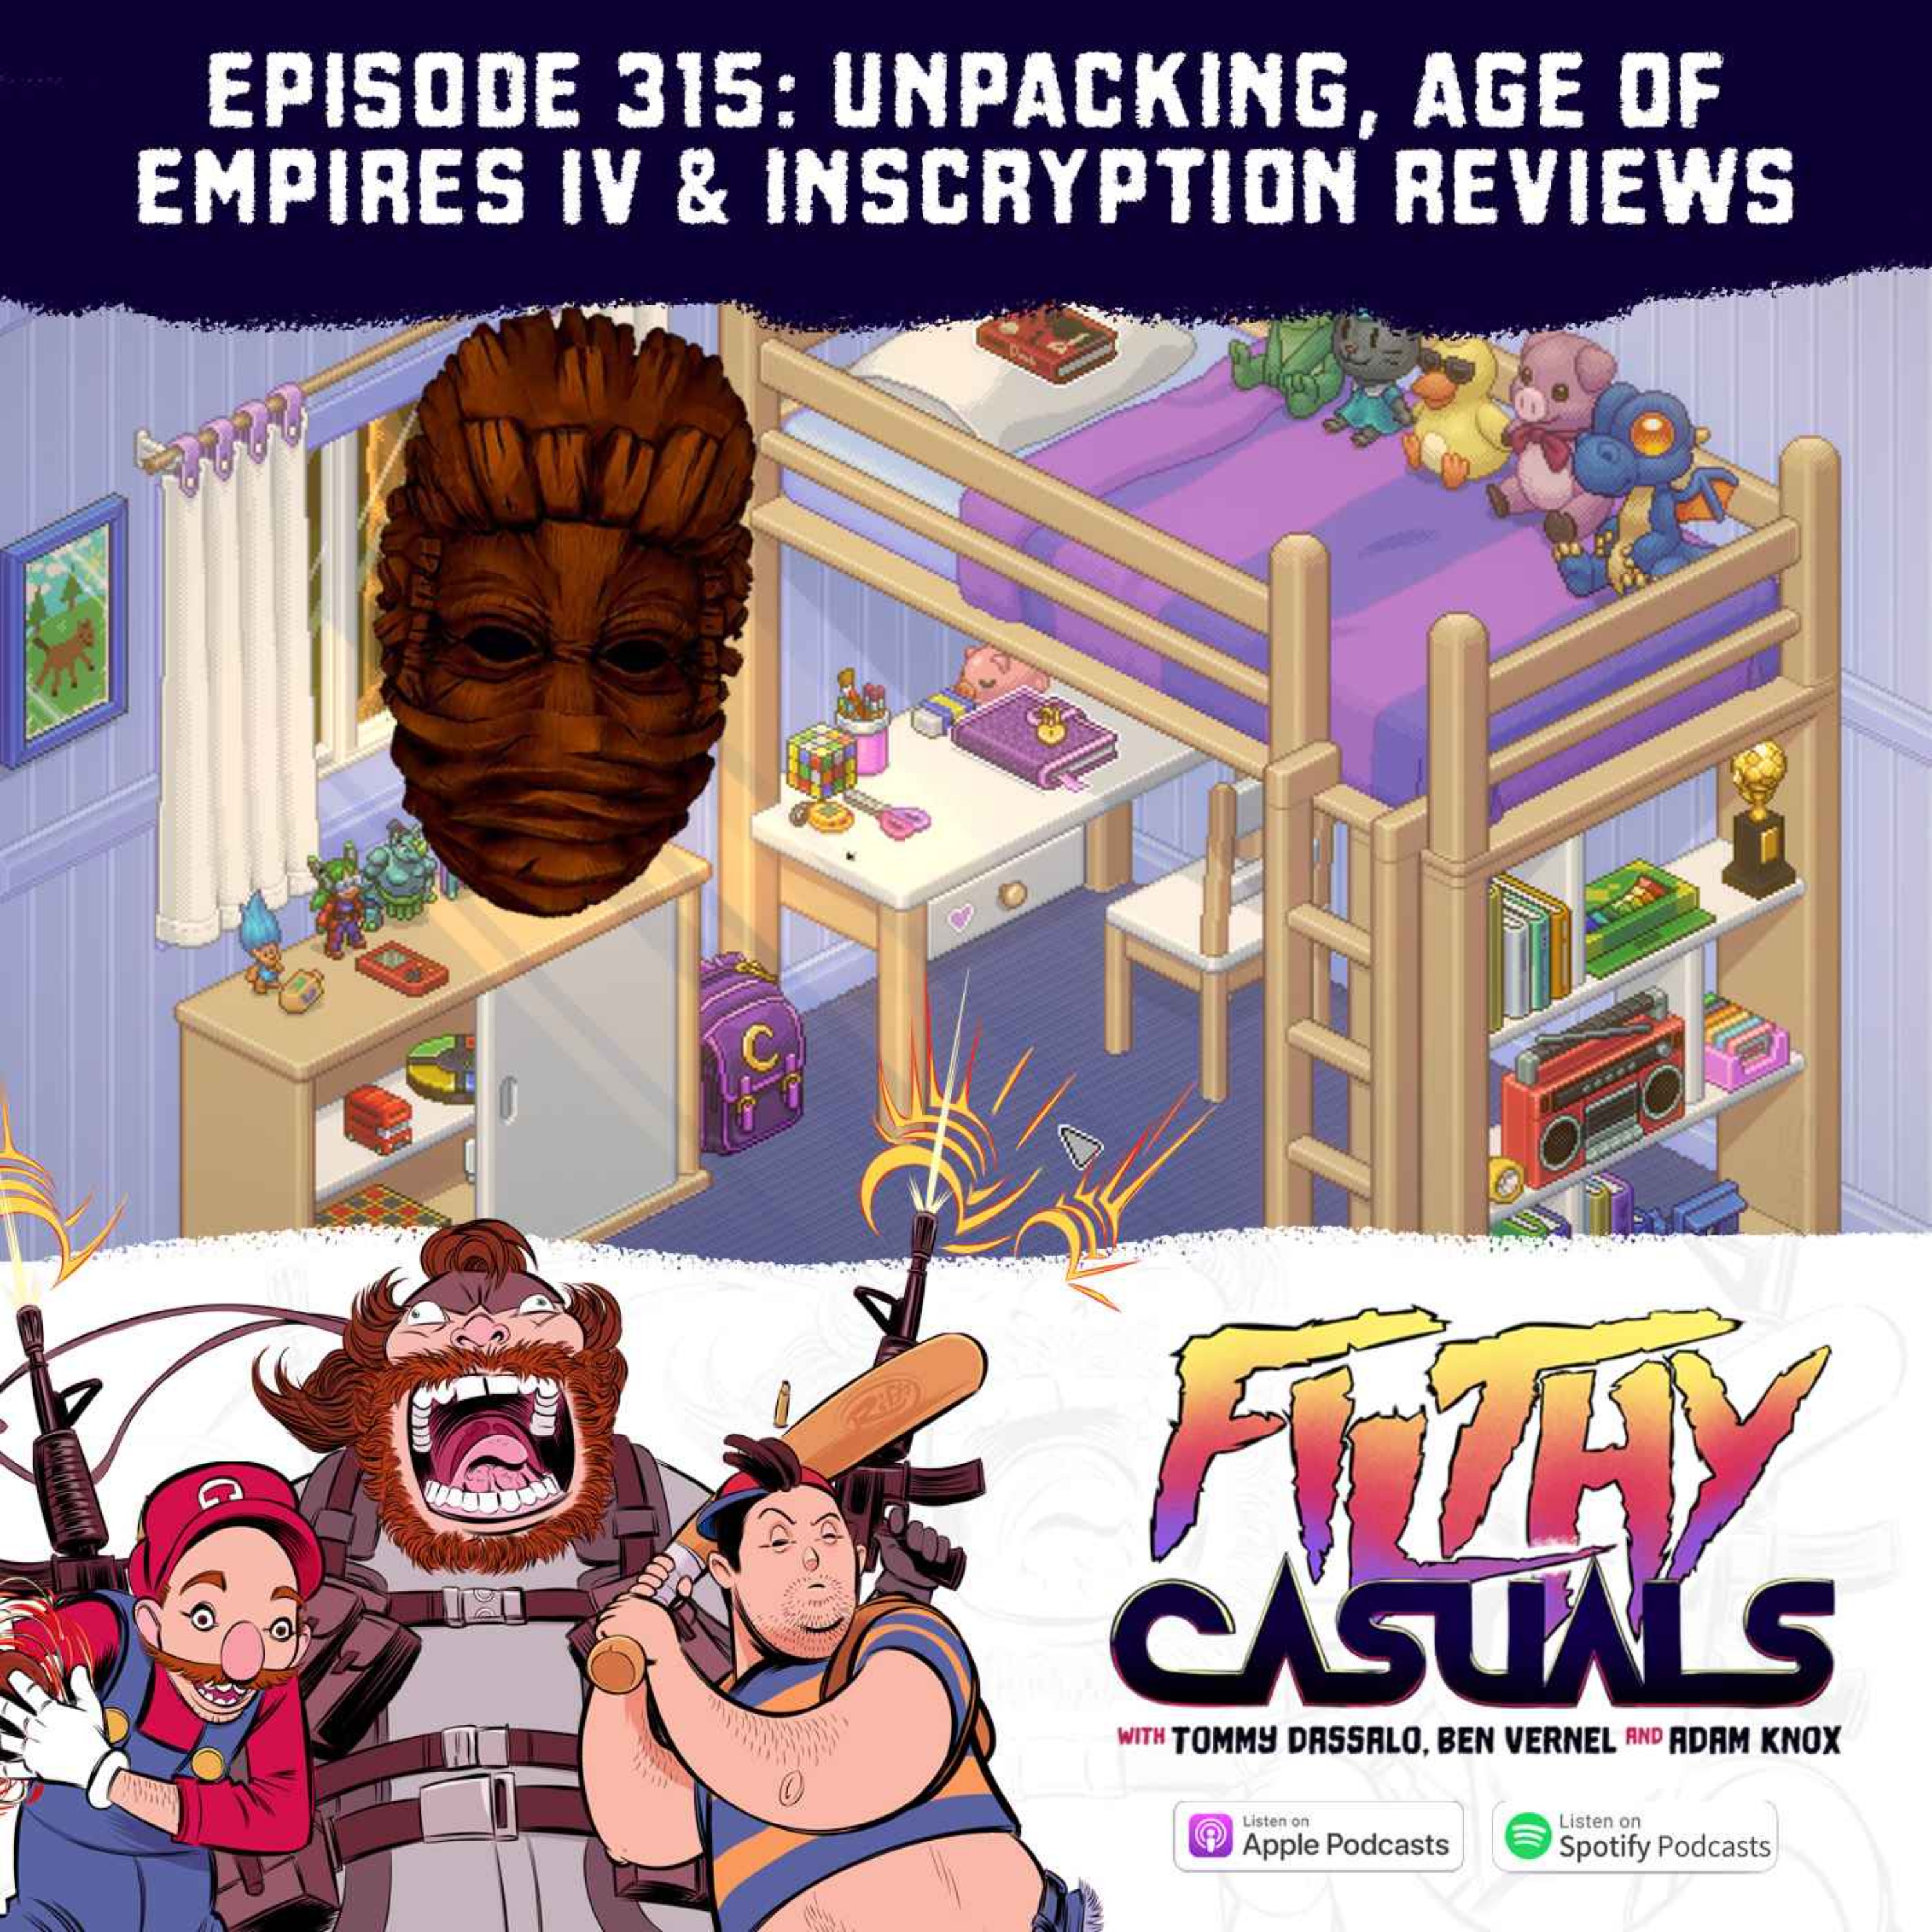 Episode 315: Unpacking, Age of Empires IV & Inscryption Reviews